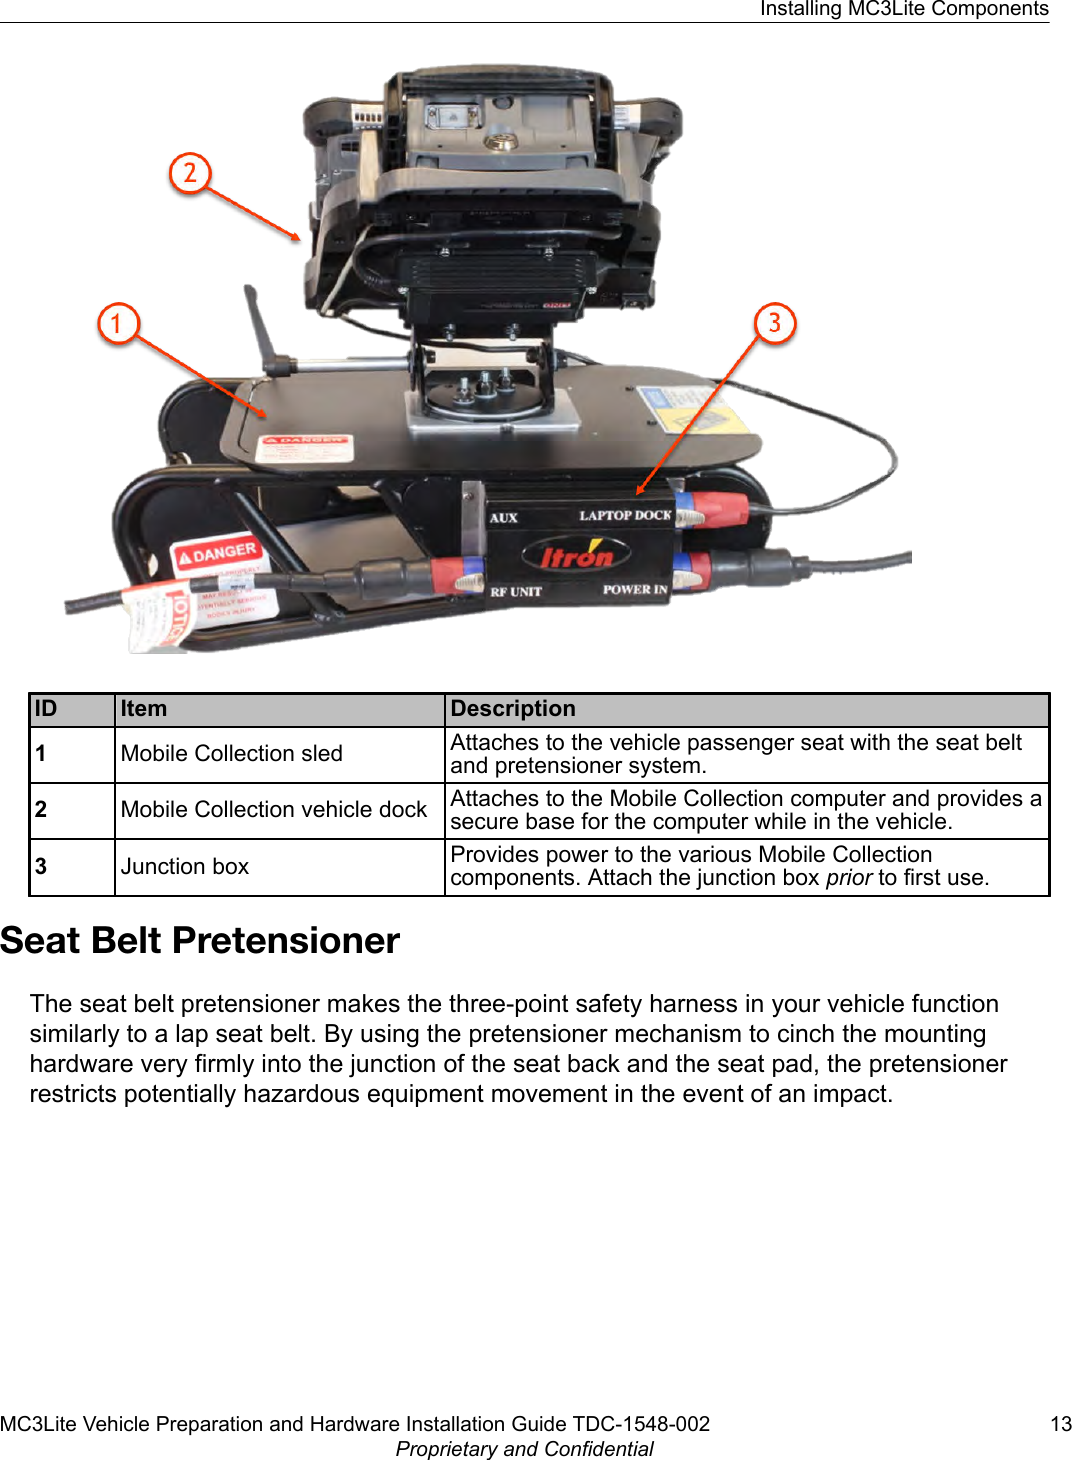 ID Item Description1Mobile Collection sled Attaches to the vehicle passenger seat with the seat beltand pretensioner system.2Mobile Collection vehicle dock Attaches to the Mobile Collection computer and provides asecure base for the computer while in the vehicle.3Junction box Provides power to the various Mobile Collectioncomponents. Attach the junction box prior to first use.Seat Belt PretensionerThe seat belt pretensioner makes the three-point safety harness in your vehicle functionsimilarly to a lap seat belt. By using the pretensioner mechanism to cinch the mountinghardware very firmly into the junction of the seat back and the seat pad, the pretensionerrestricts potentially hazardous equipment movement in the event of an impact.Installing MC3Lite ComponentsMC3Lite Vehicle Preparation and Hardware Installation Guide TDC-1548-002 13Proprietary and Confidential